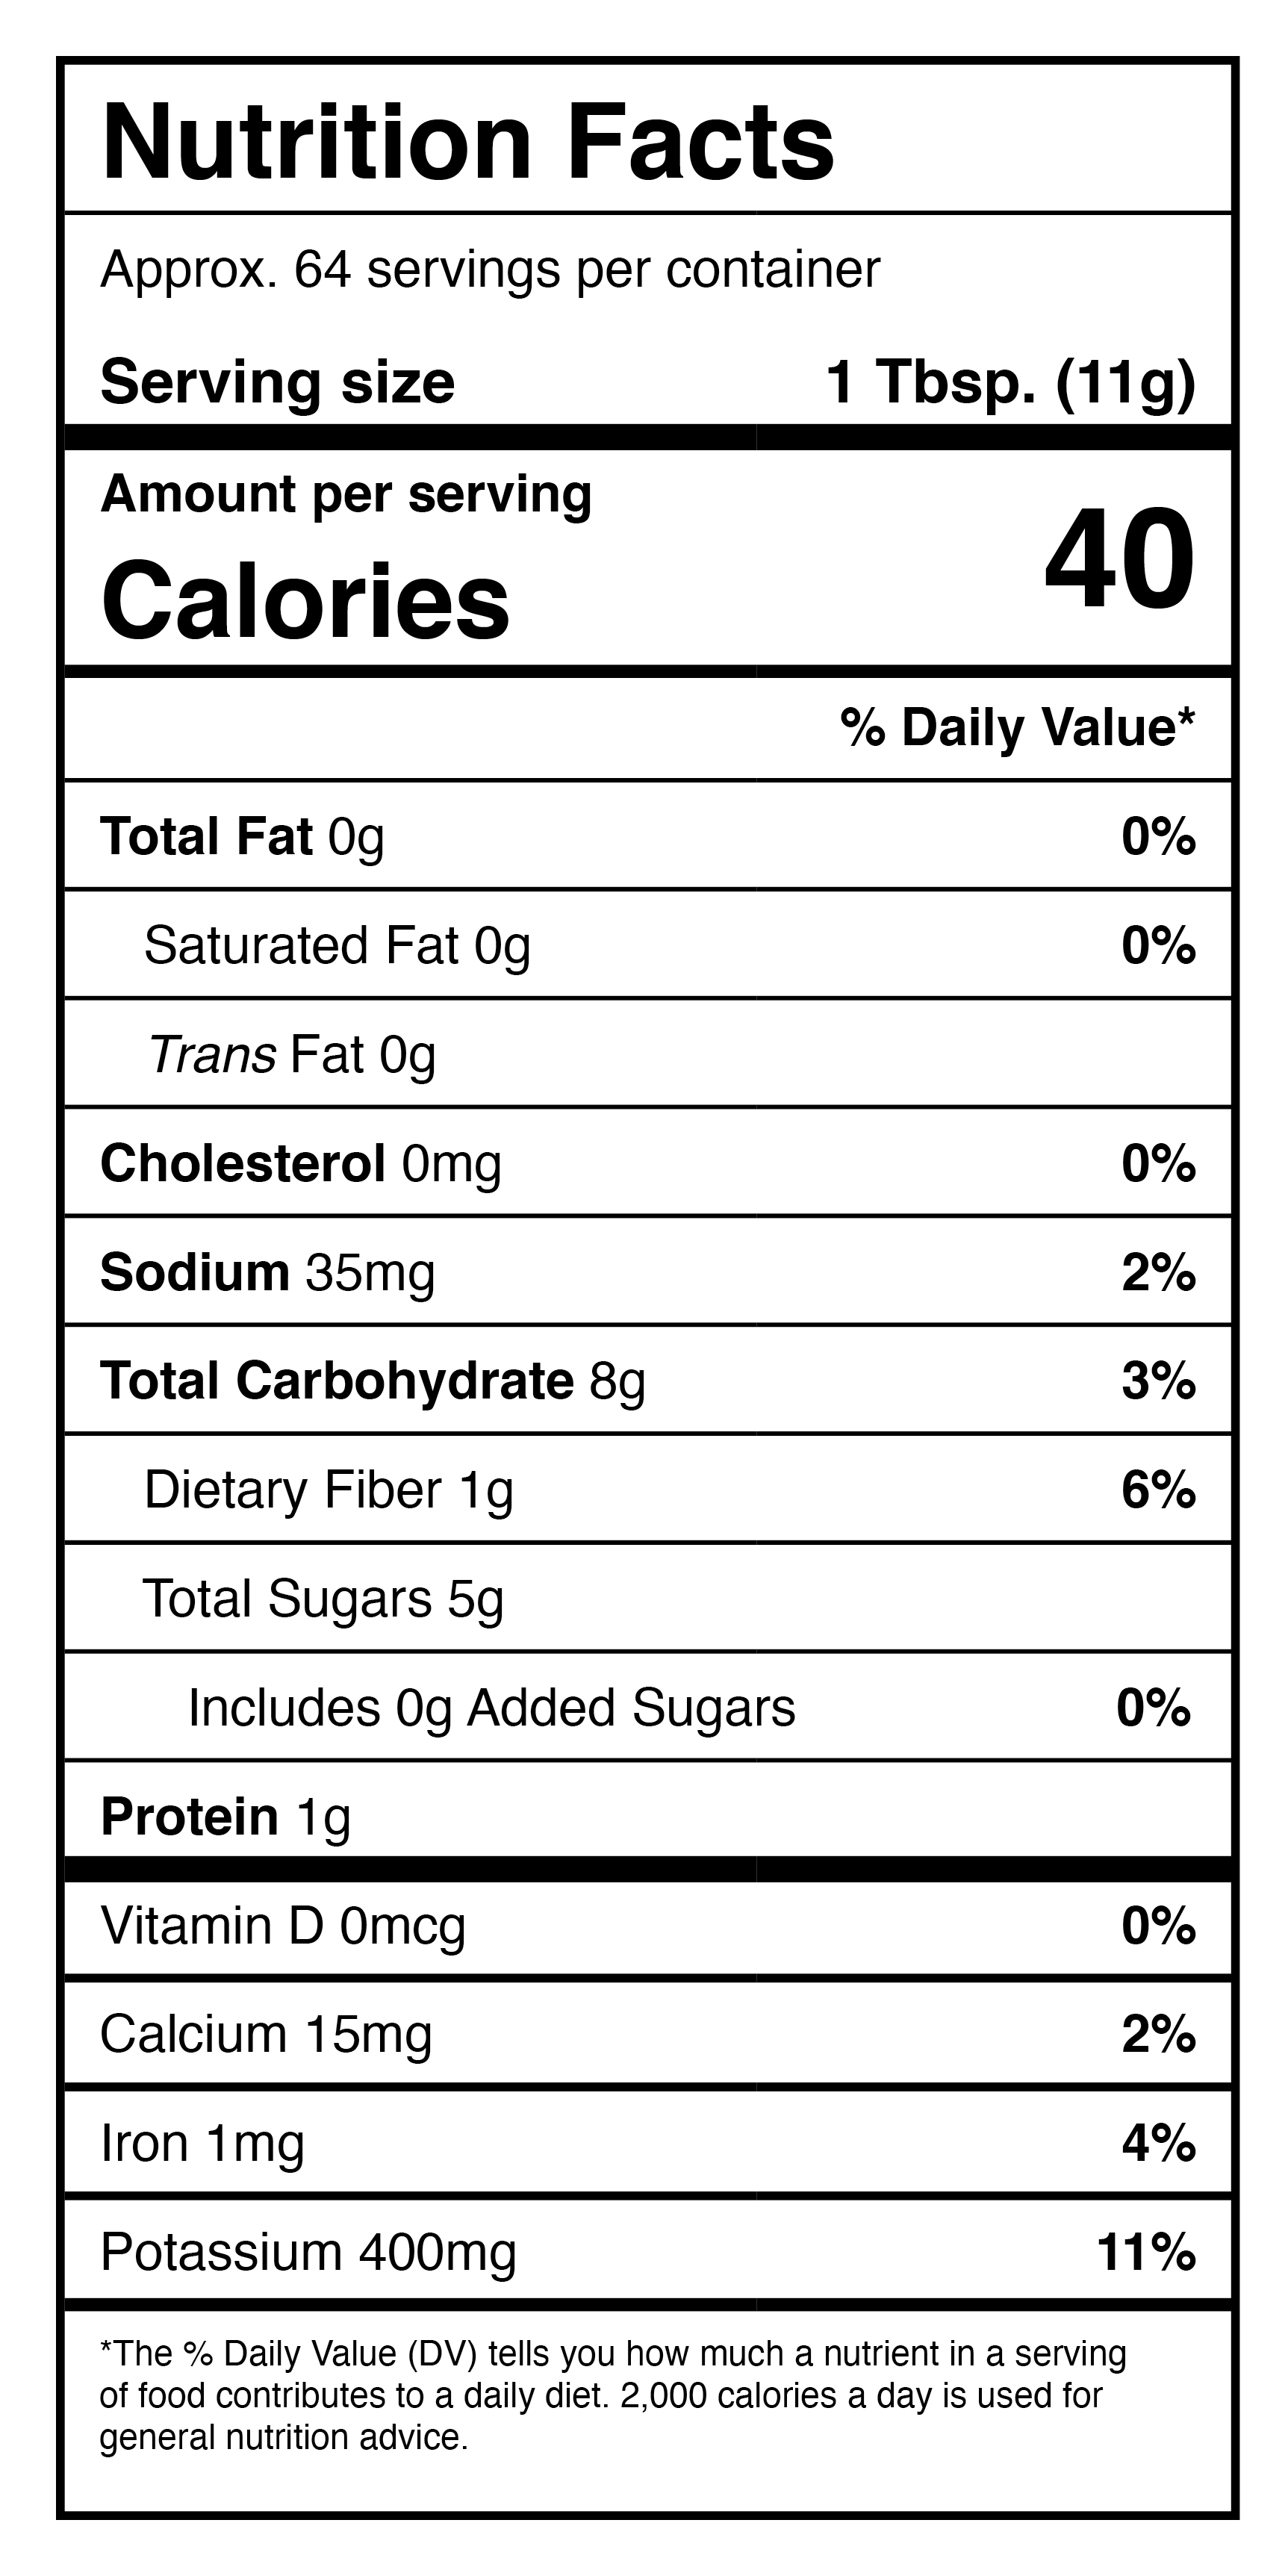 A nutrition label for an organic protein powder.